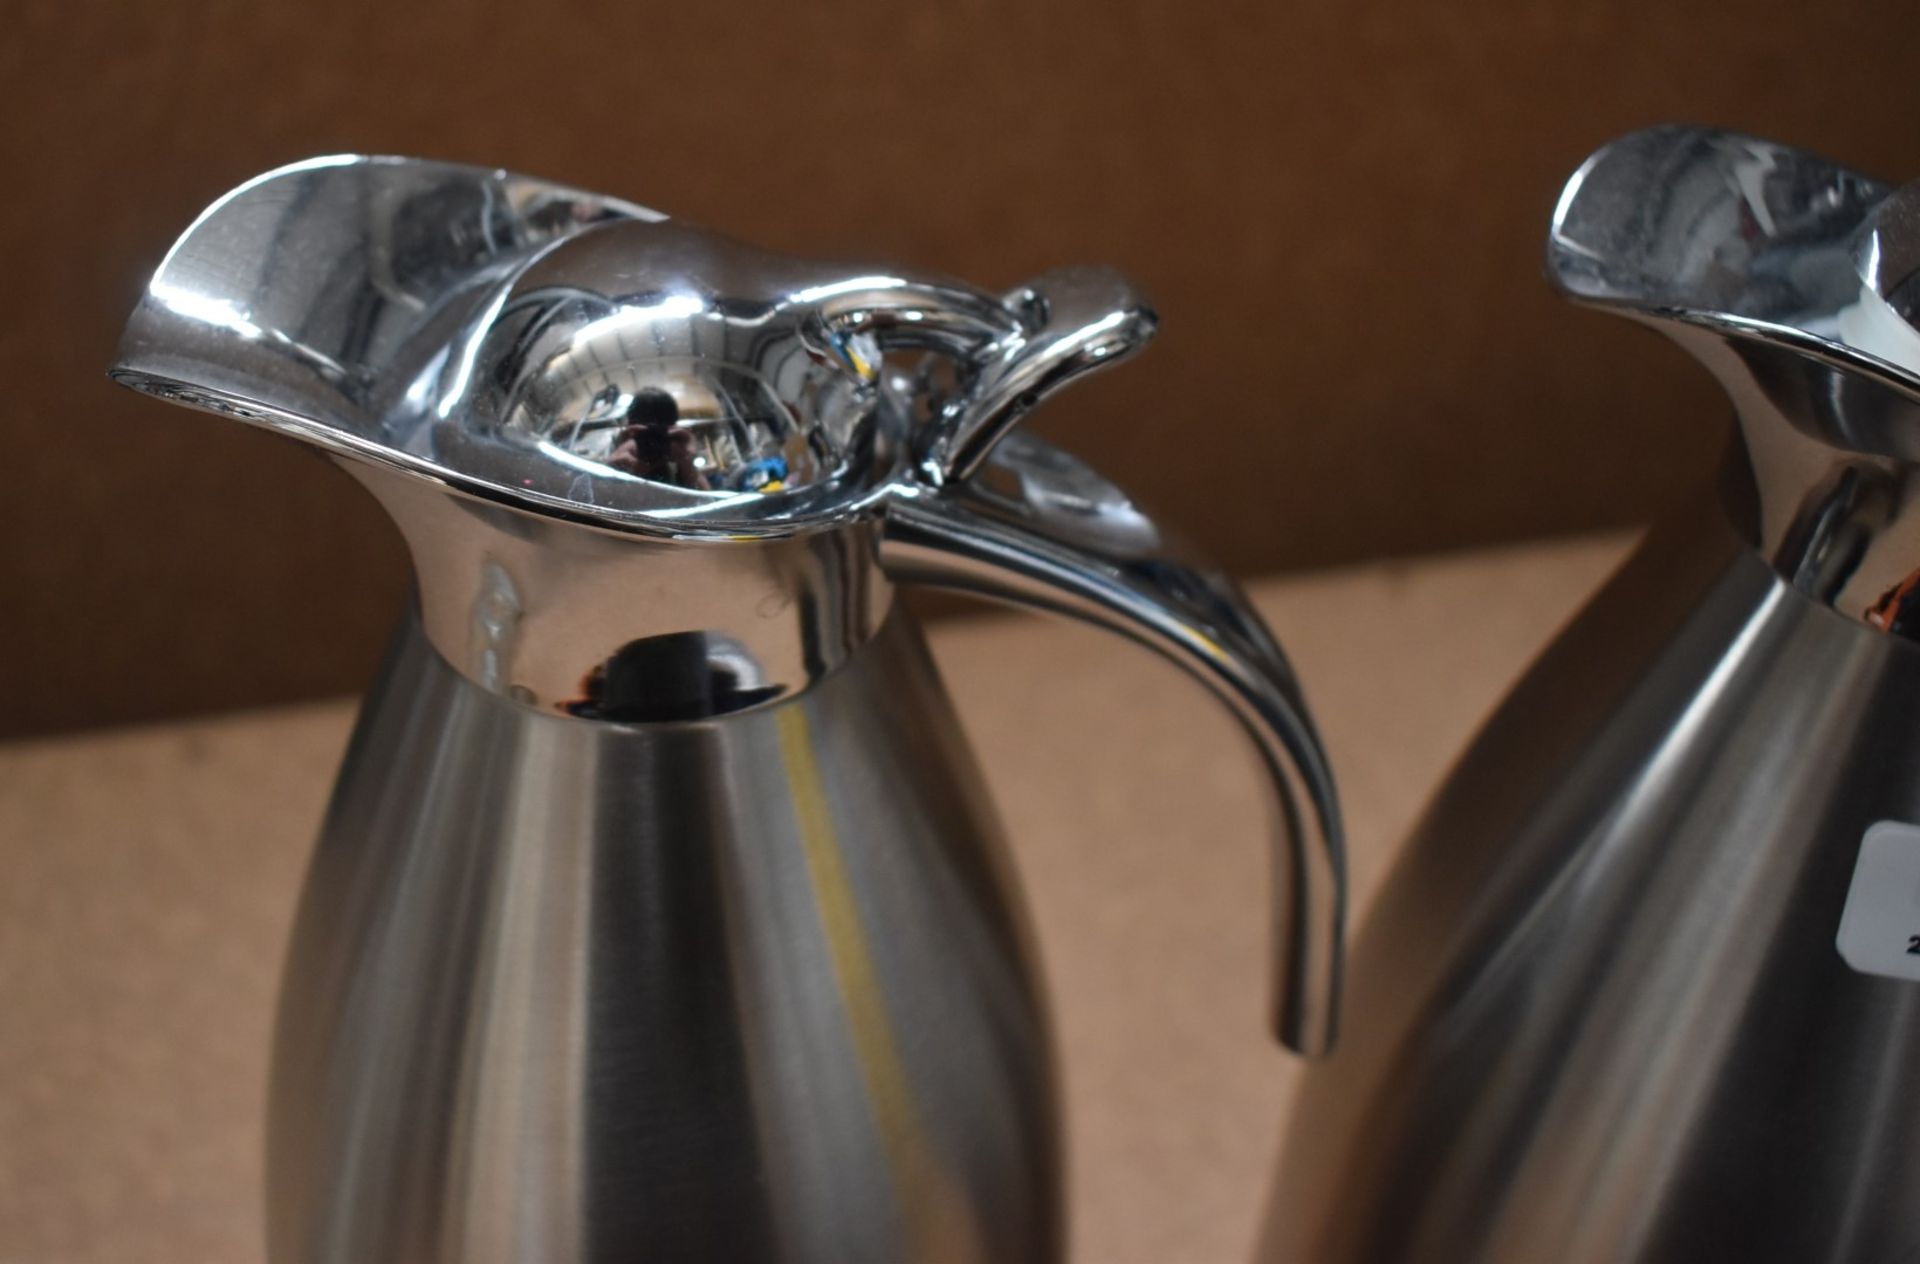 4 x Stainless Steel Boiling Water / Coffee Jug Dispensers - Ref: MPC101 P1 - CL678 - Location: - Image 3 of 4